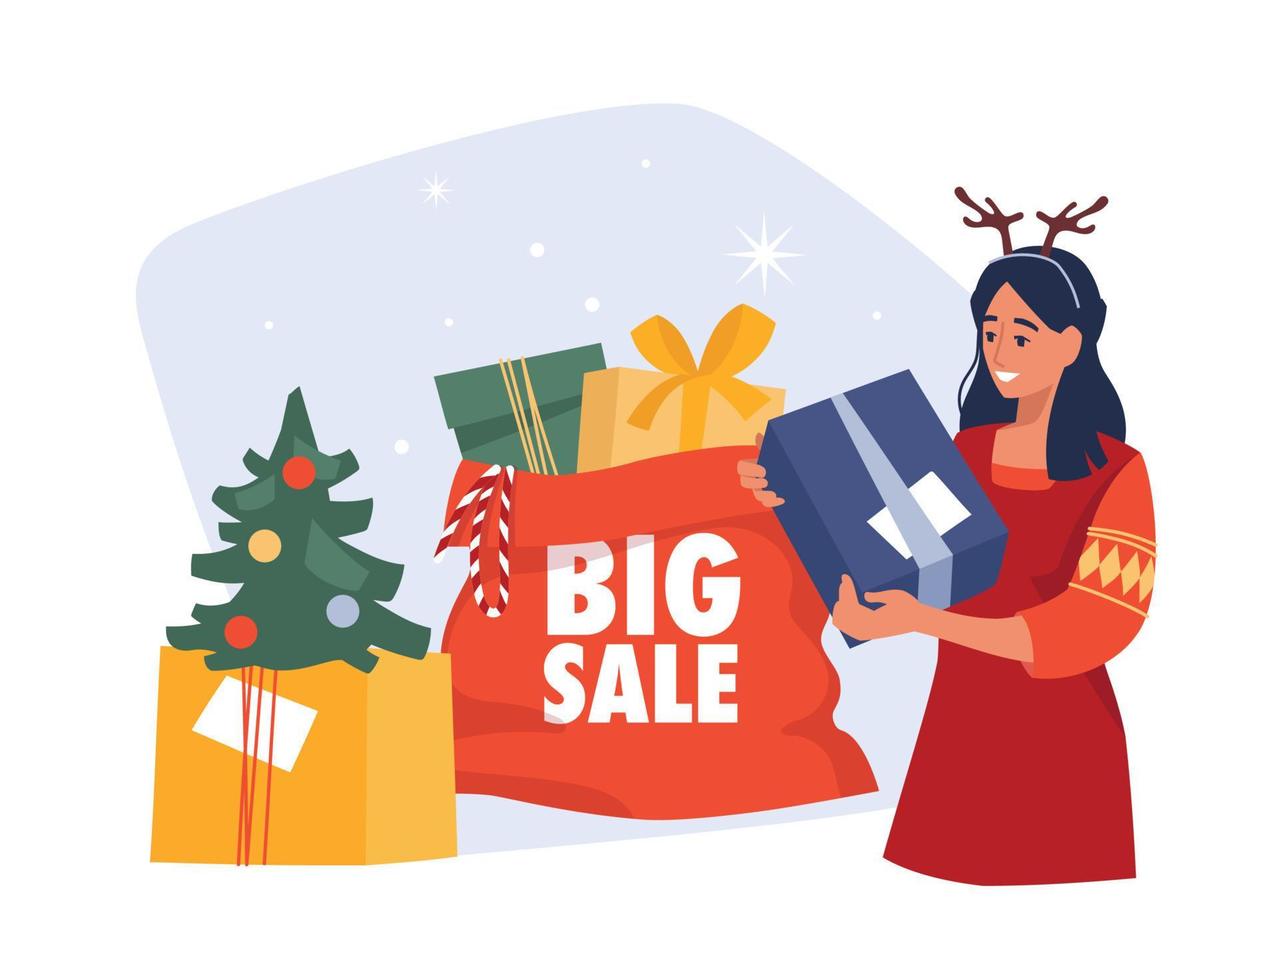 People with gifts. Girl with a gift box. Christmas sale. Preparing for Christmas. Vector image.